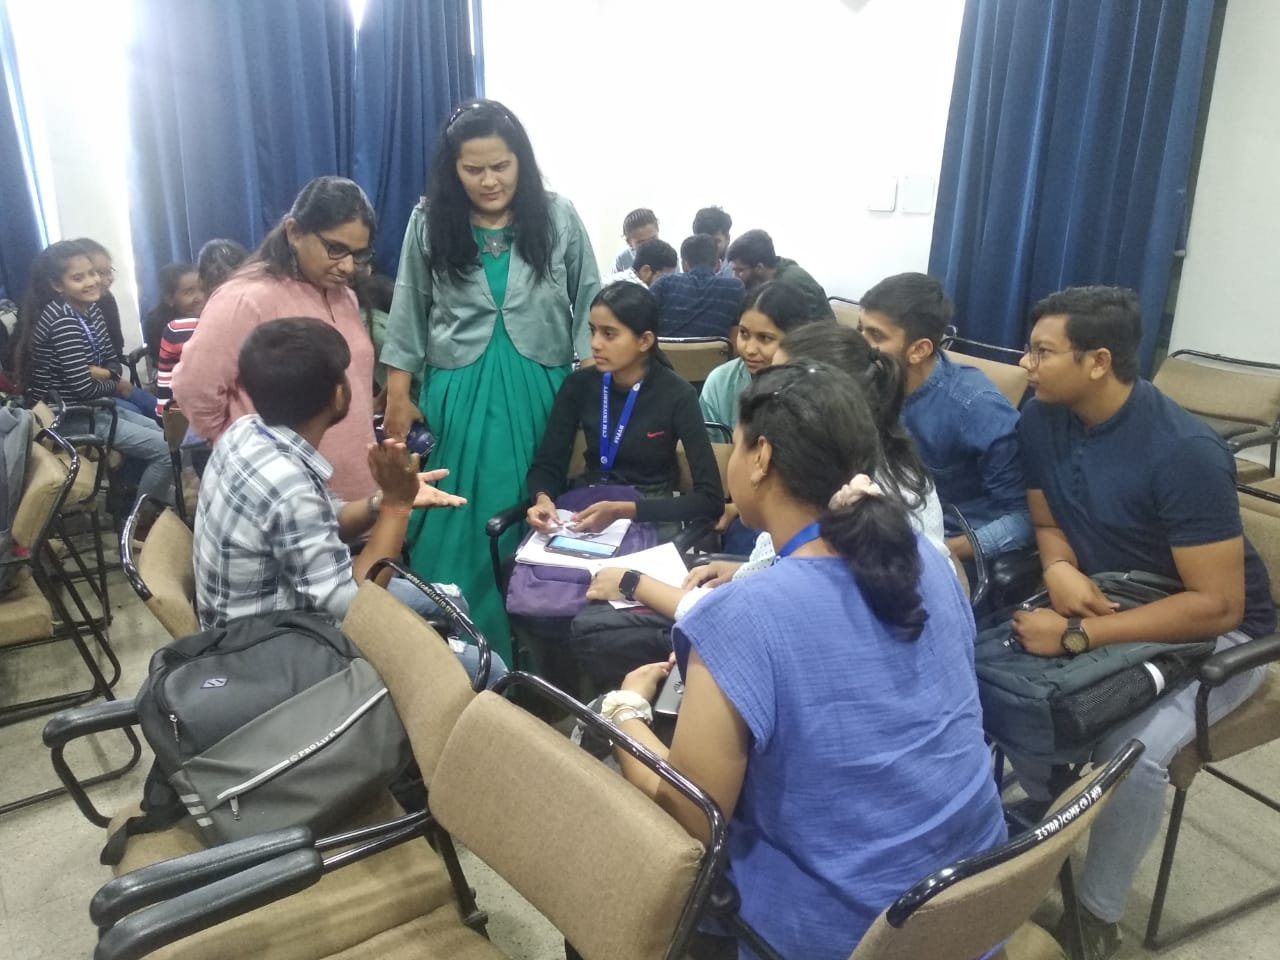 ISTAR and NVPAS jointly organized Boot Camp - Design thinking, Innovation and Startup